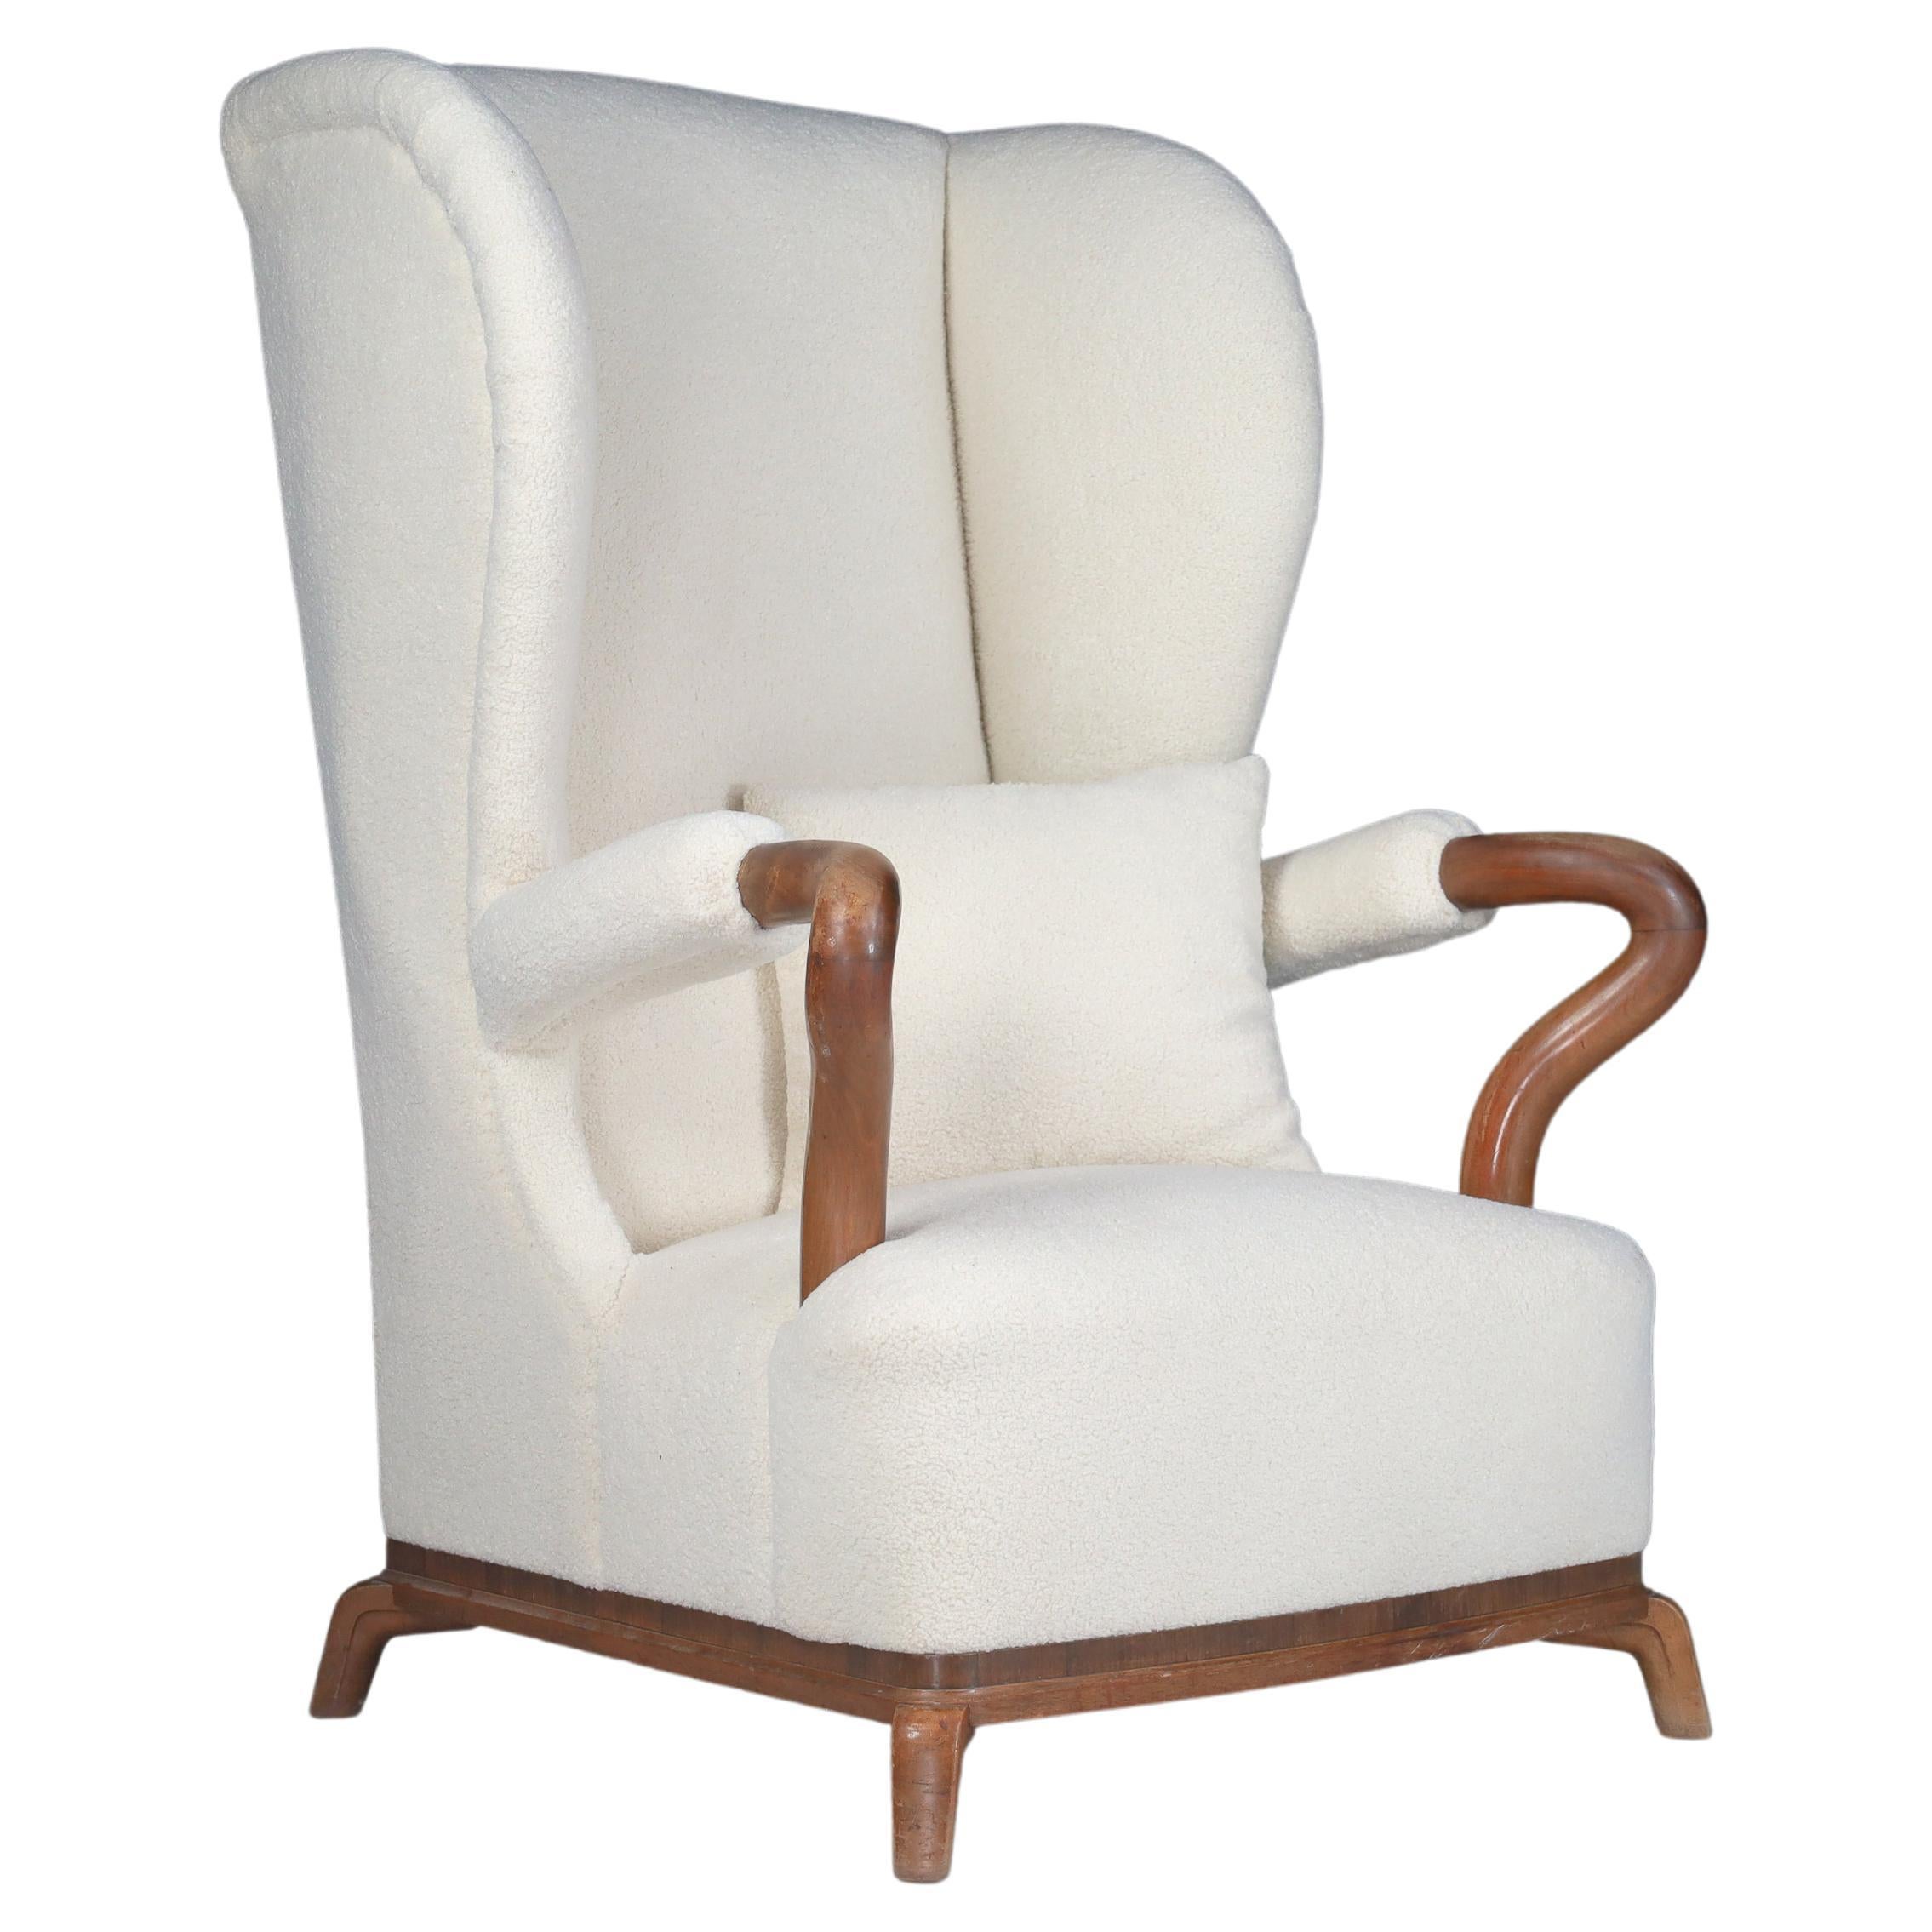 Large Monumental Wingback Armchair in Re-upholstered Teddy Fabric, France 1930s